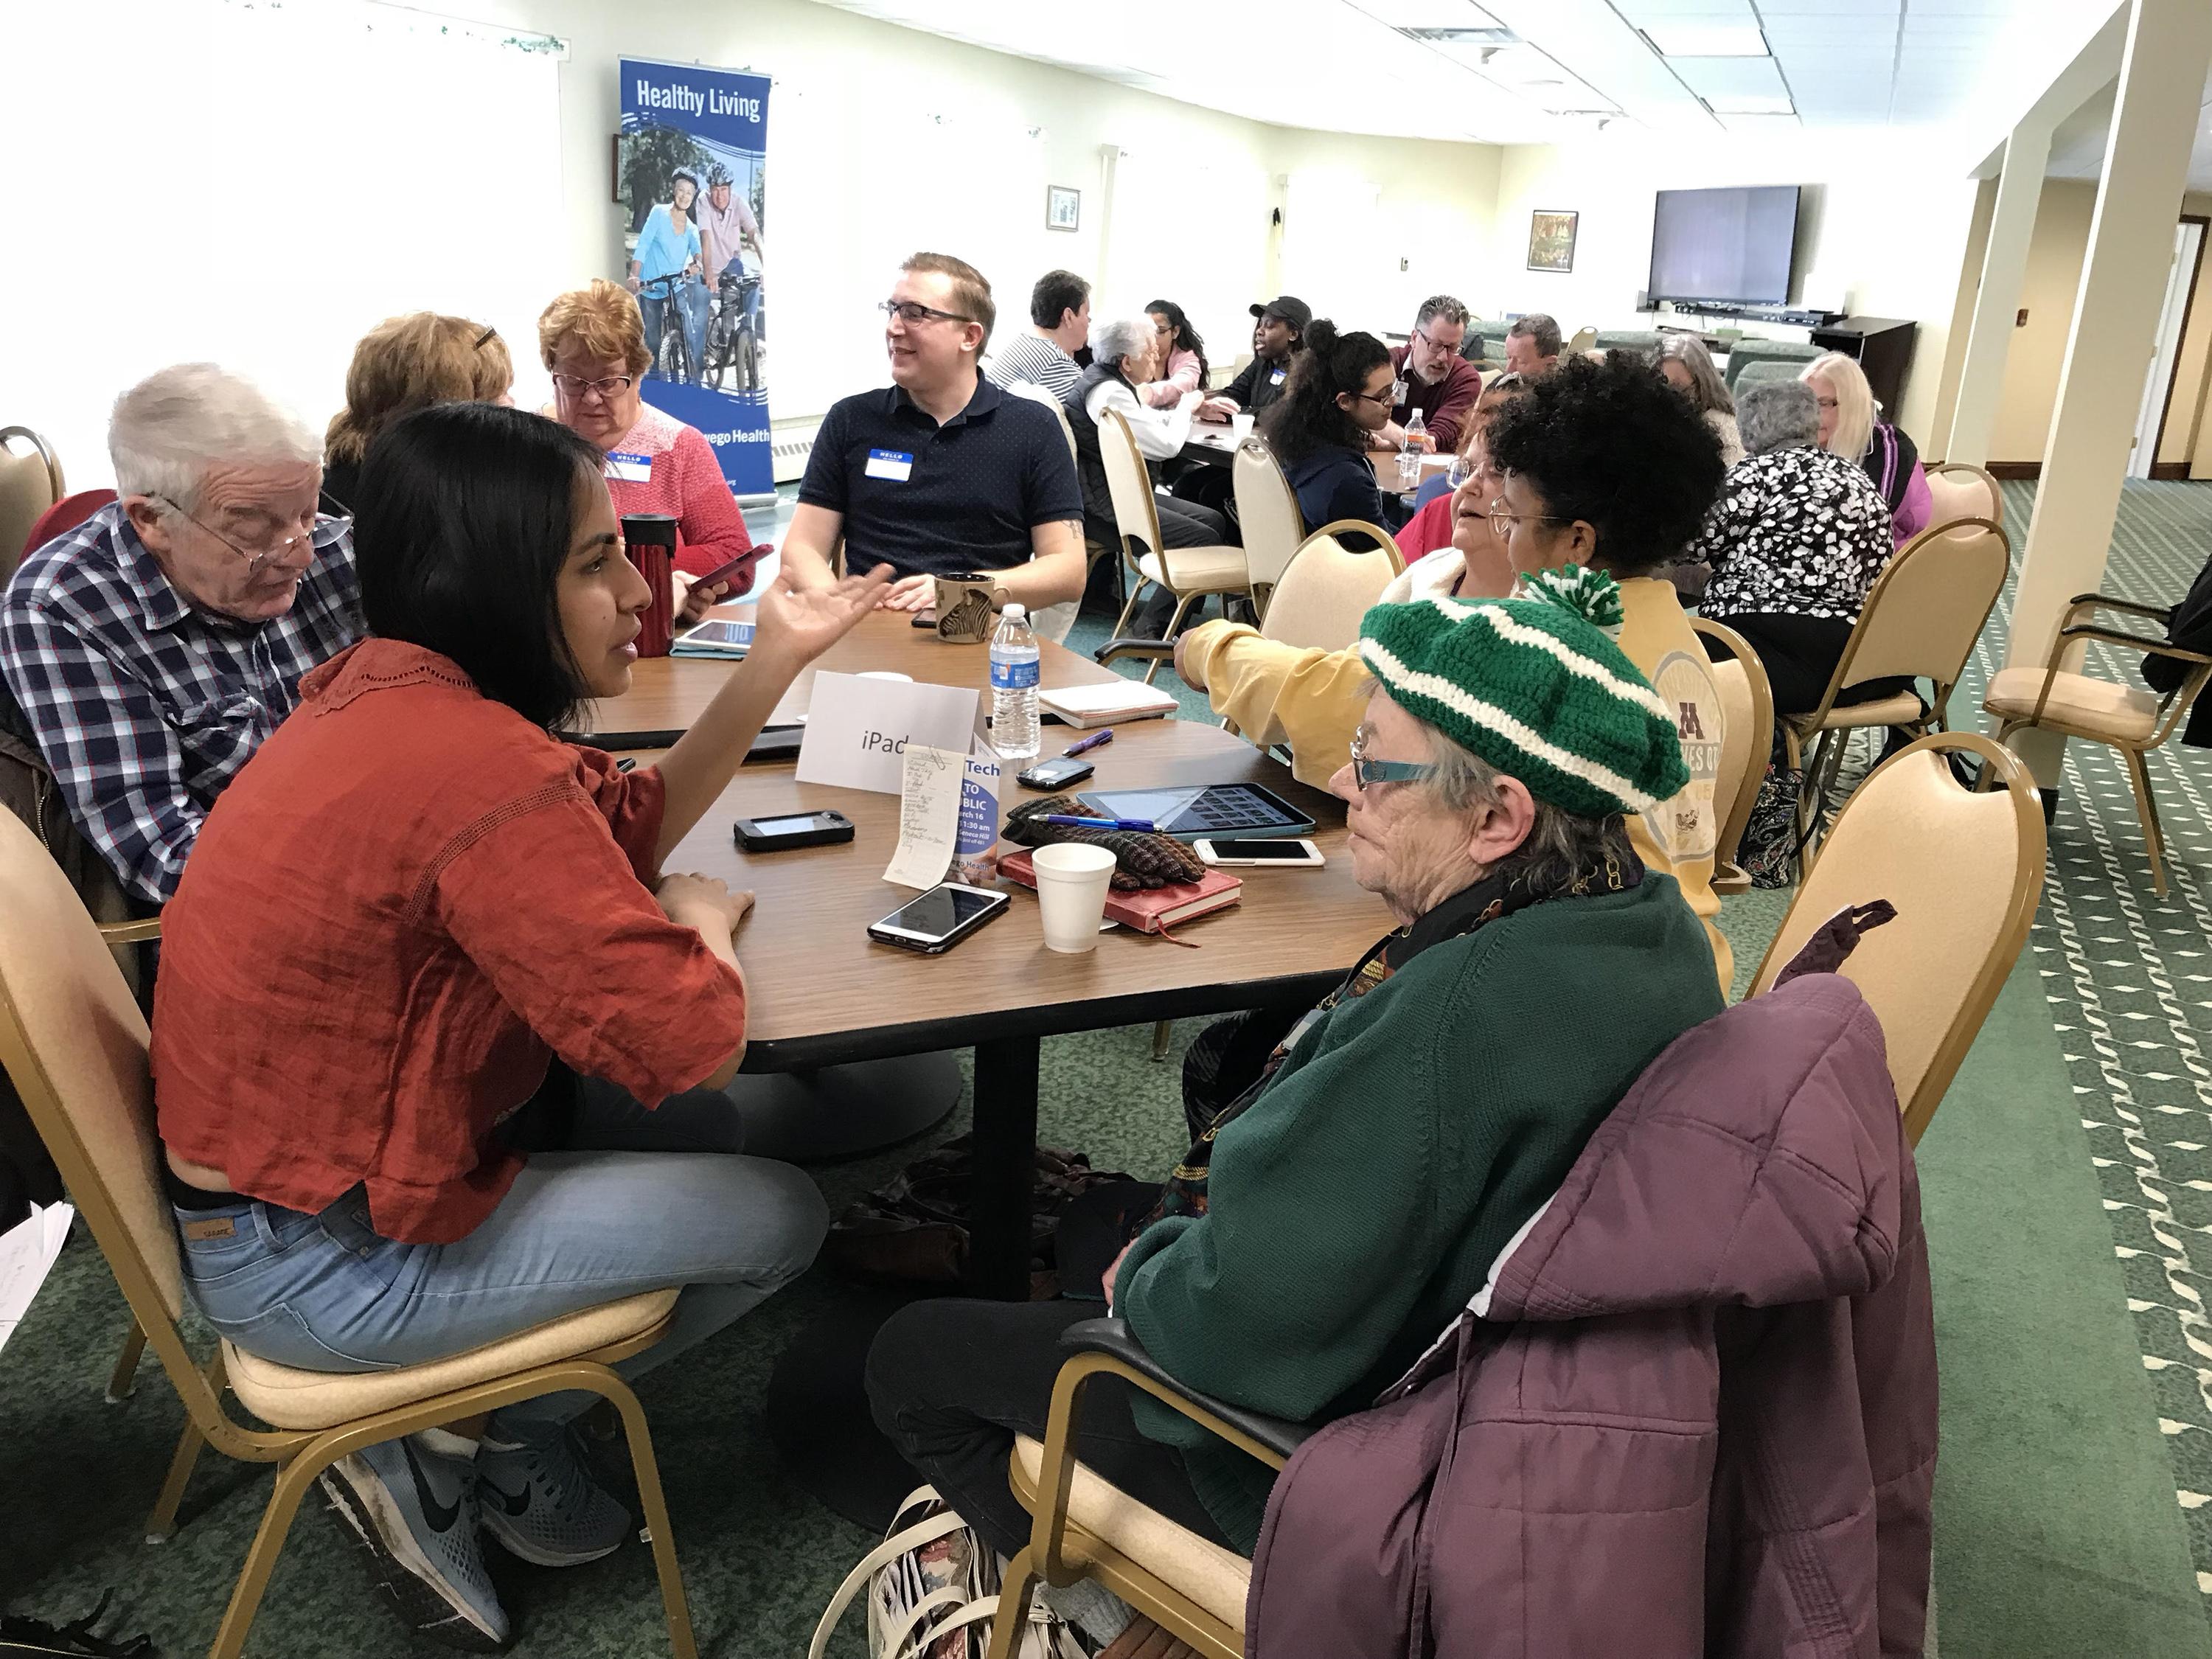 Students participate in a local community outreach effort to spend time with senior citizens at Springside at Seneca Hill and help them become more technically savvy